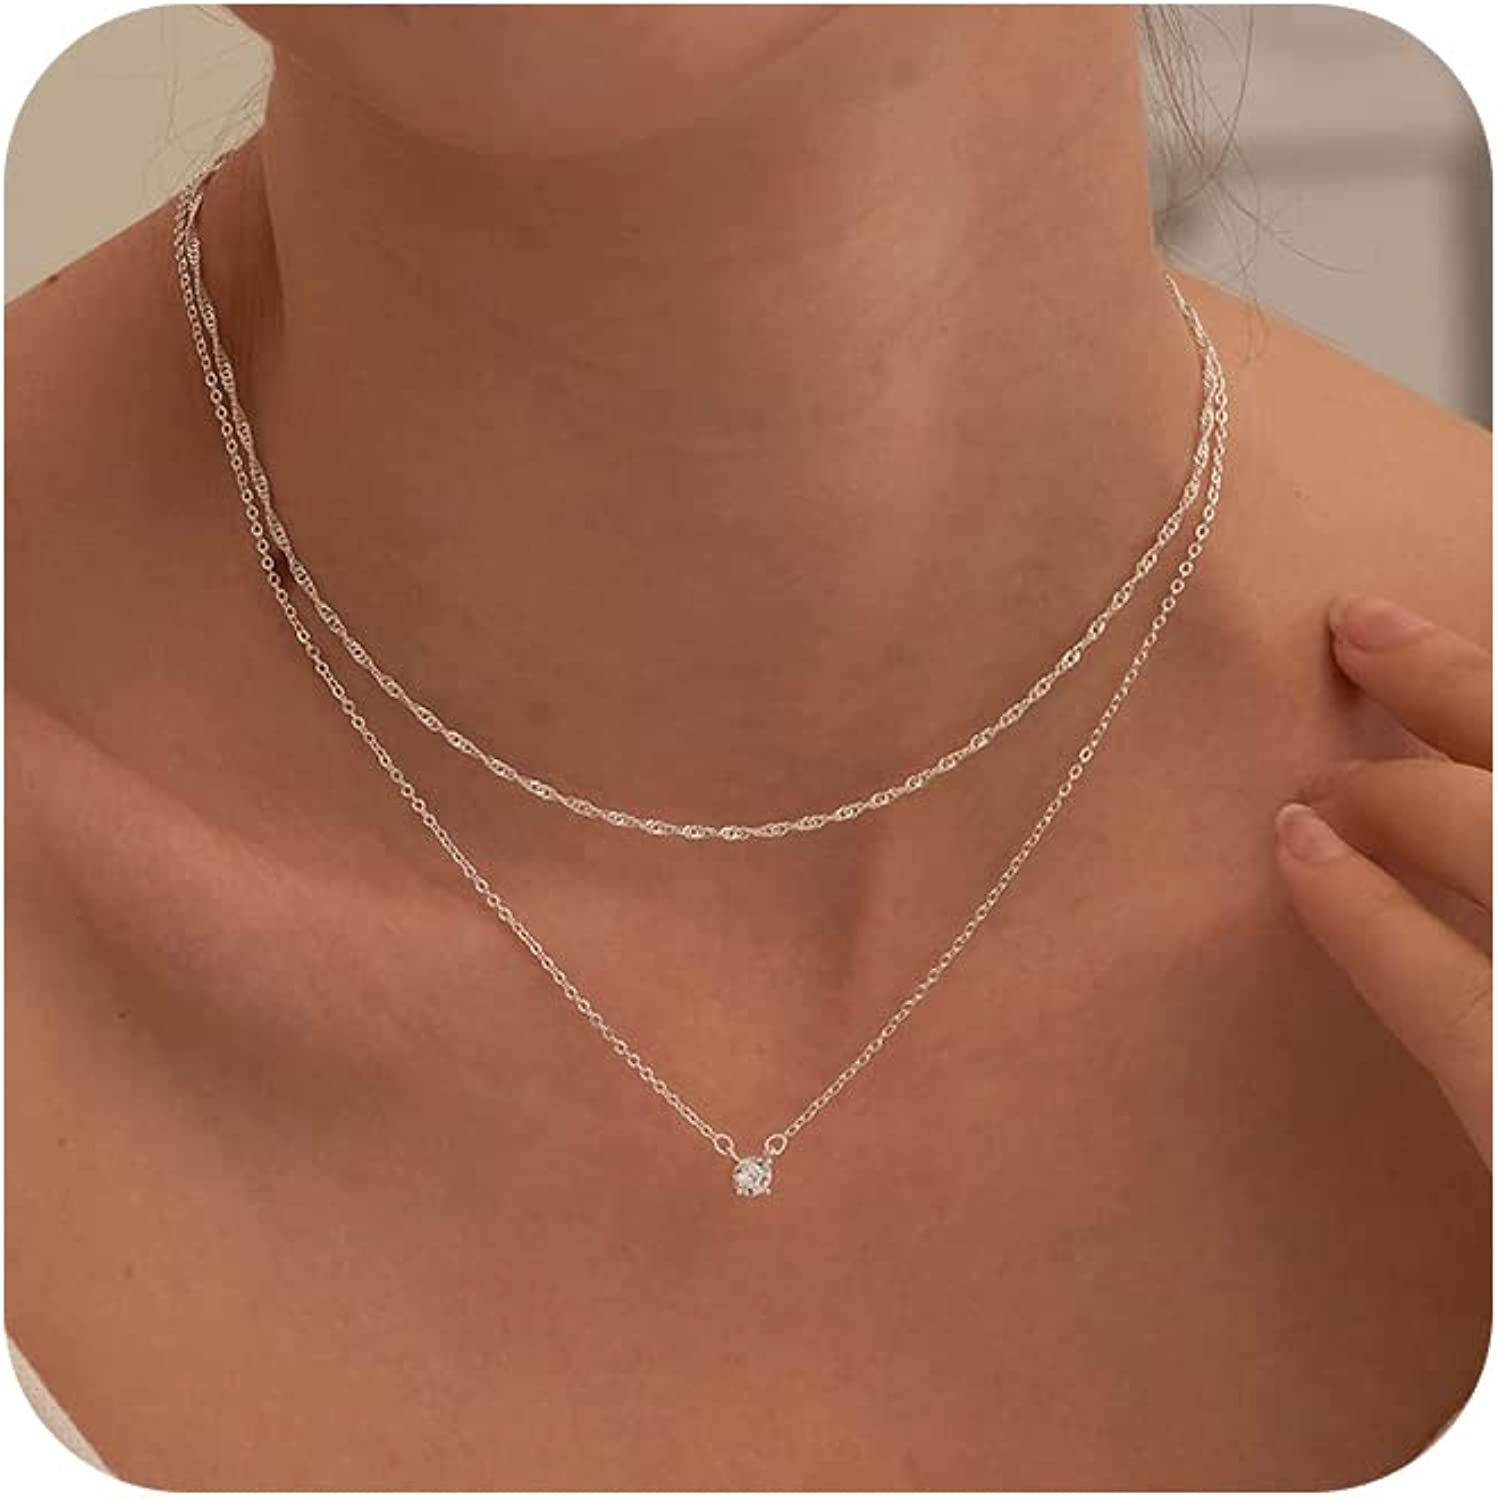 Silver Necklace for Women, Dainty Silver Layered Necklaces Sterling Silver Diamond Pendant Necklace Simple Silver Chain Choker Necklaces Fashion